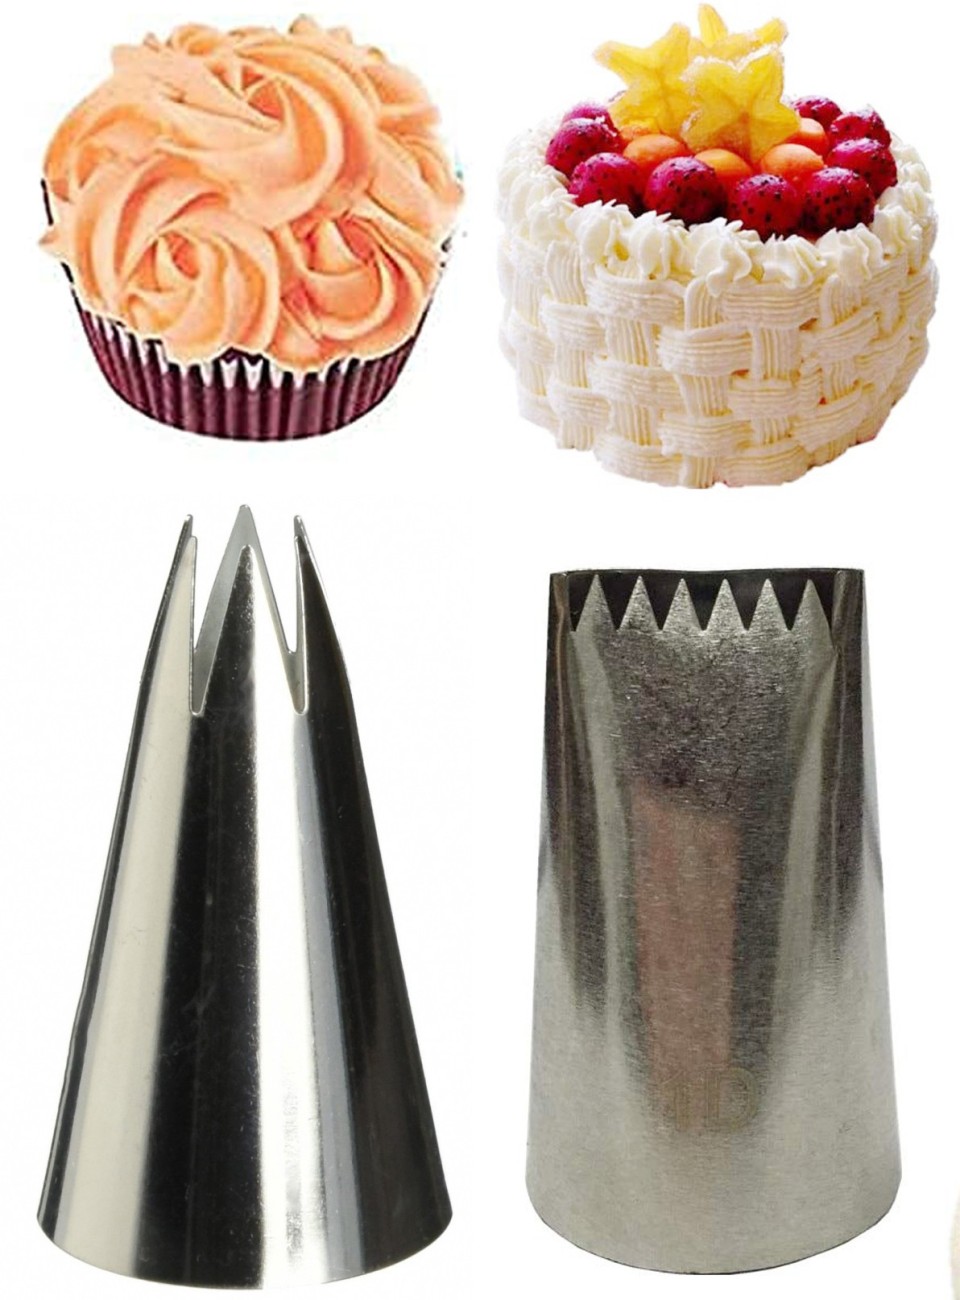 JAMBOREE 2Pcs Frill + Weave Basket Nozzle Weave Nozzle Large Size Basket  Cake Decorating Icing Tip, Muffin Cupcake Decoration Stainless Steel Nozzle  Steel Kitchen Tool Set (Pack of 2) : Amazon.in: Home